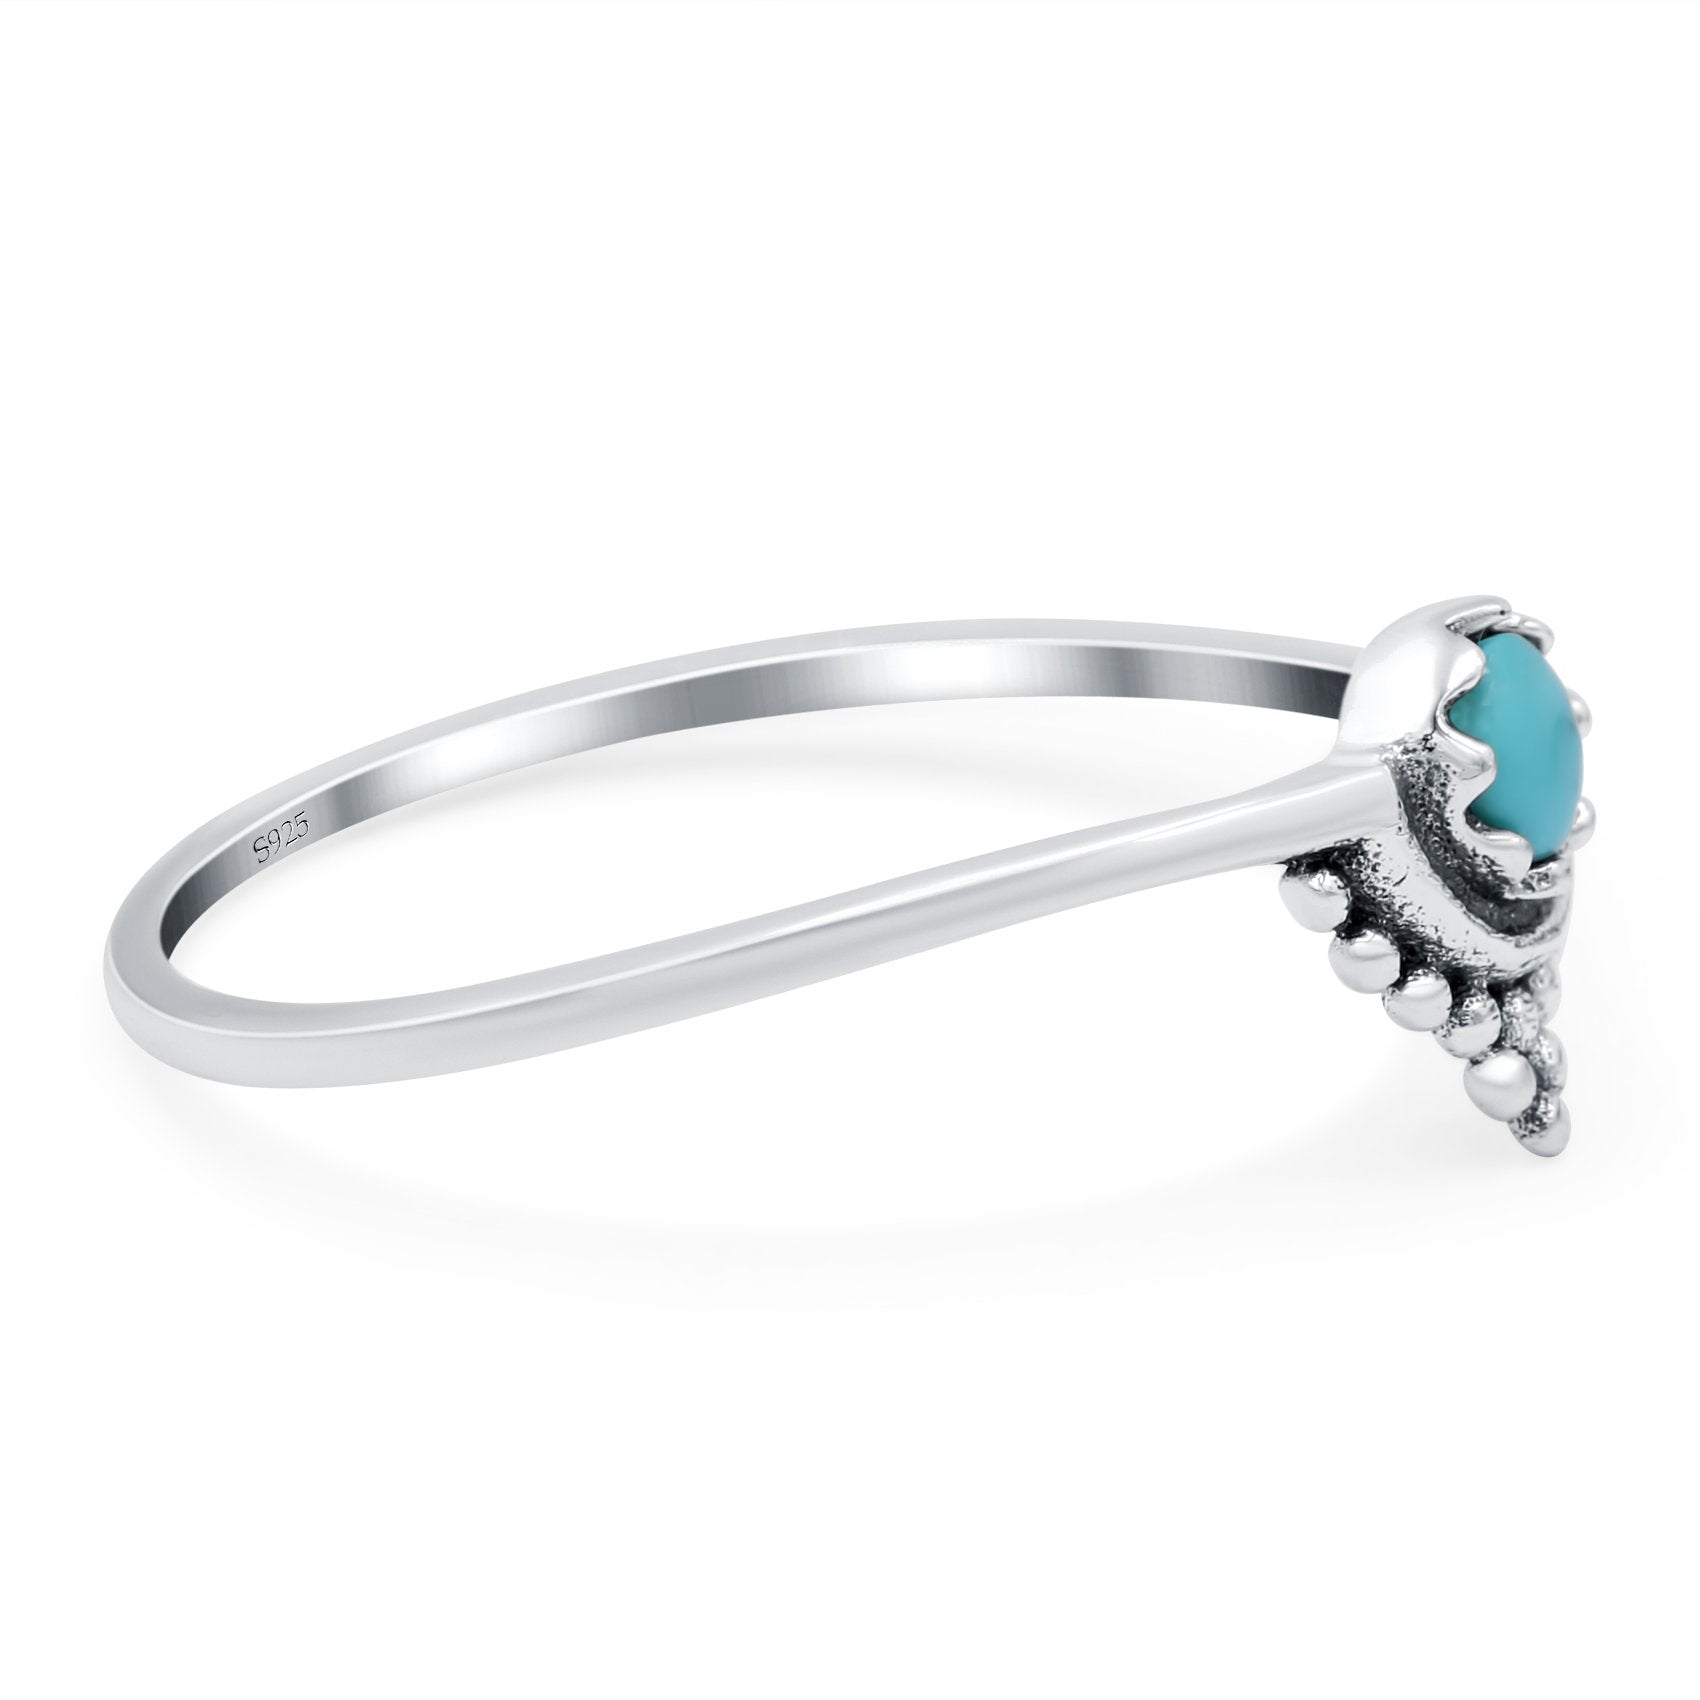 Bali Band Ring Round Simulated Turquoise 925 Sterling Silver